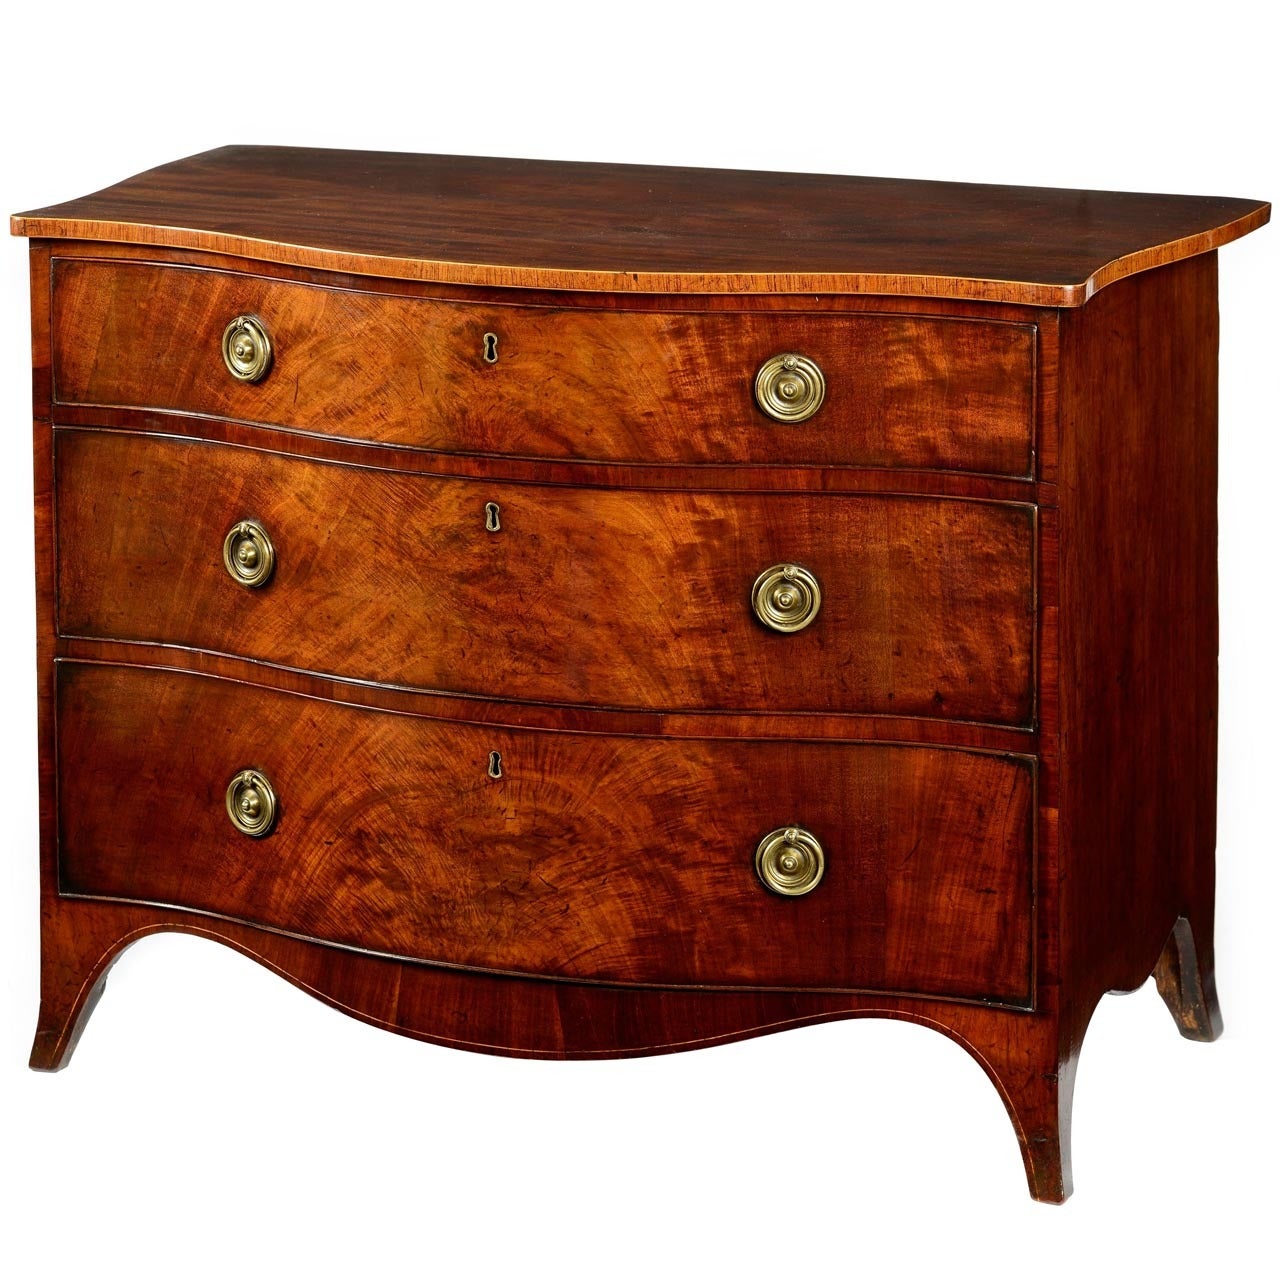 George III Sheraton Period Mahogany Serpentine Dressing Commode For Sale